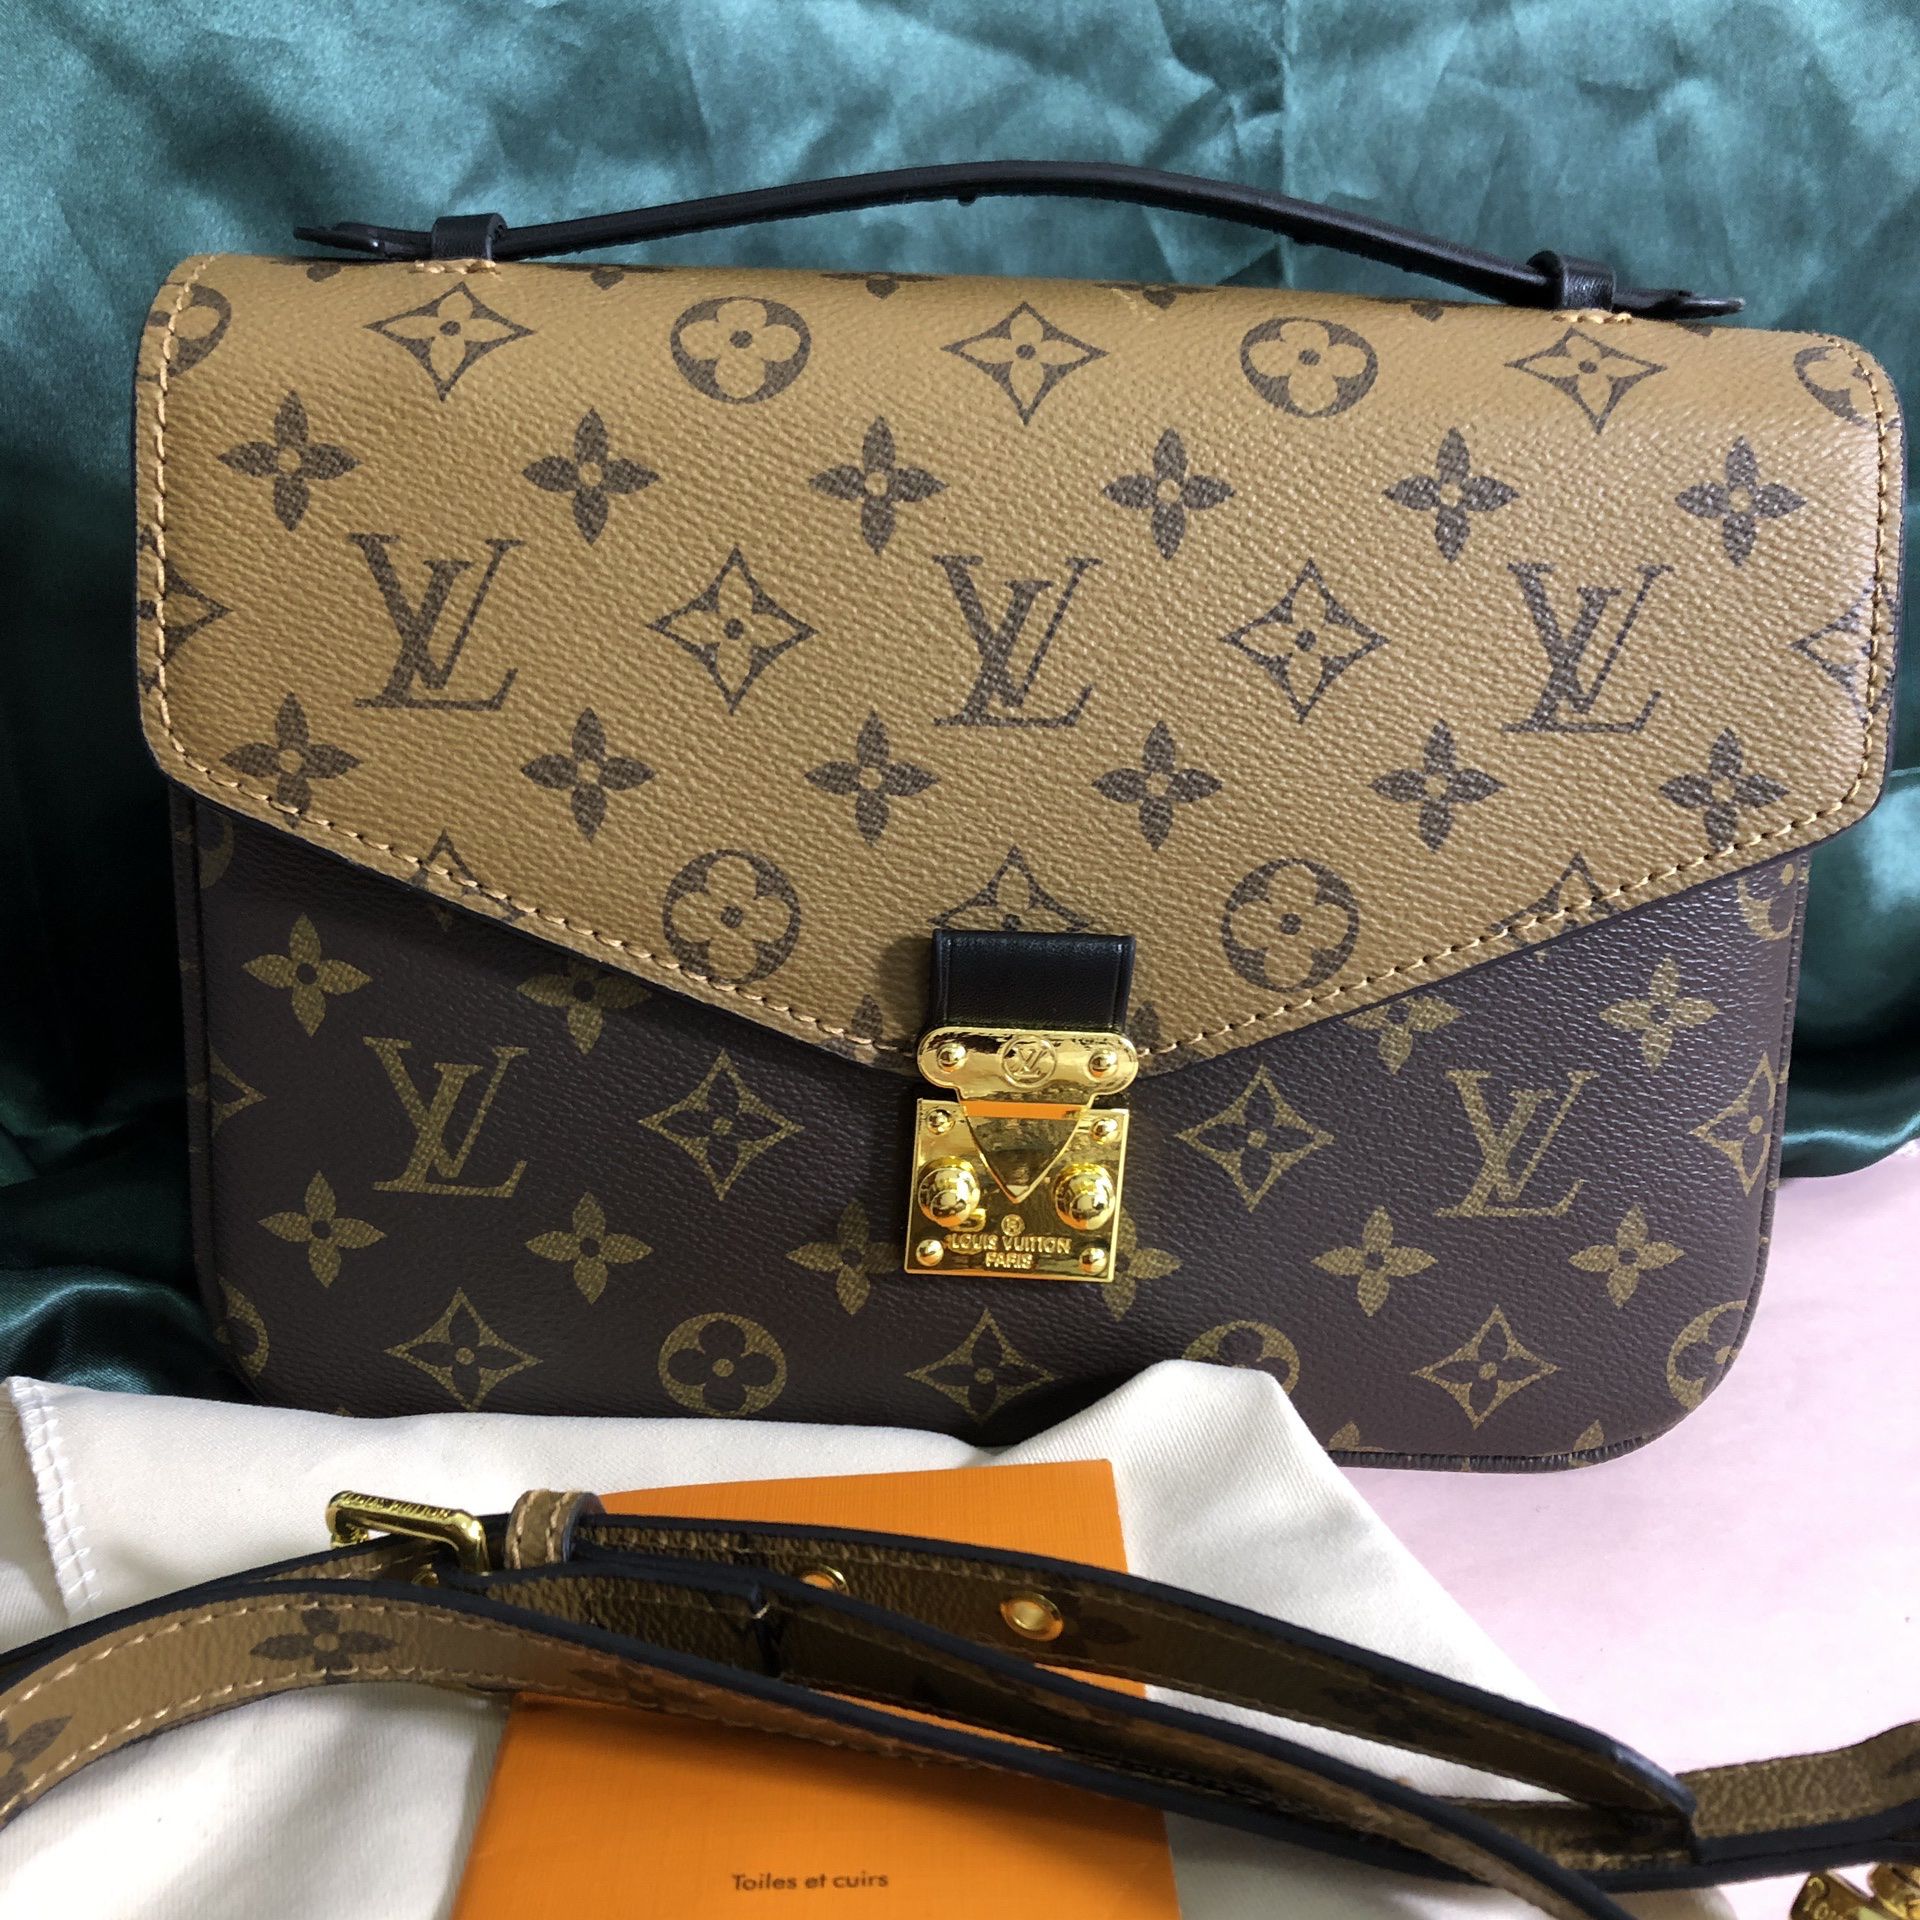 Louis Vuitton Handbags for sale in Fort Worth, Texas